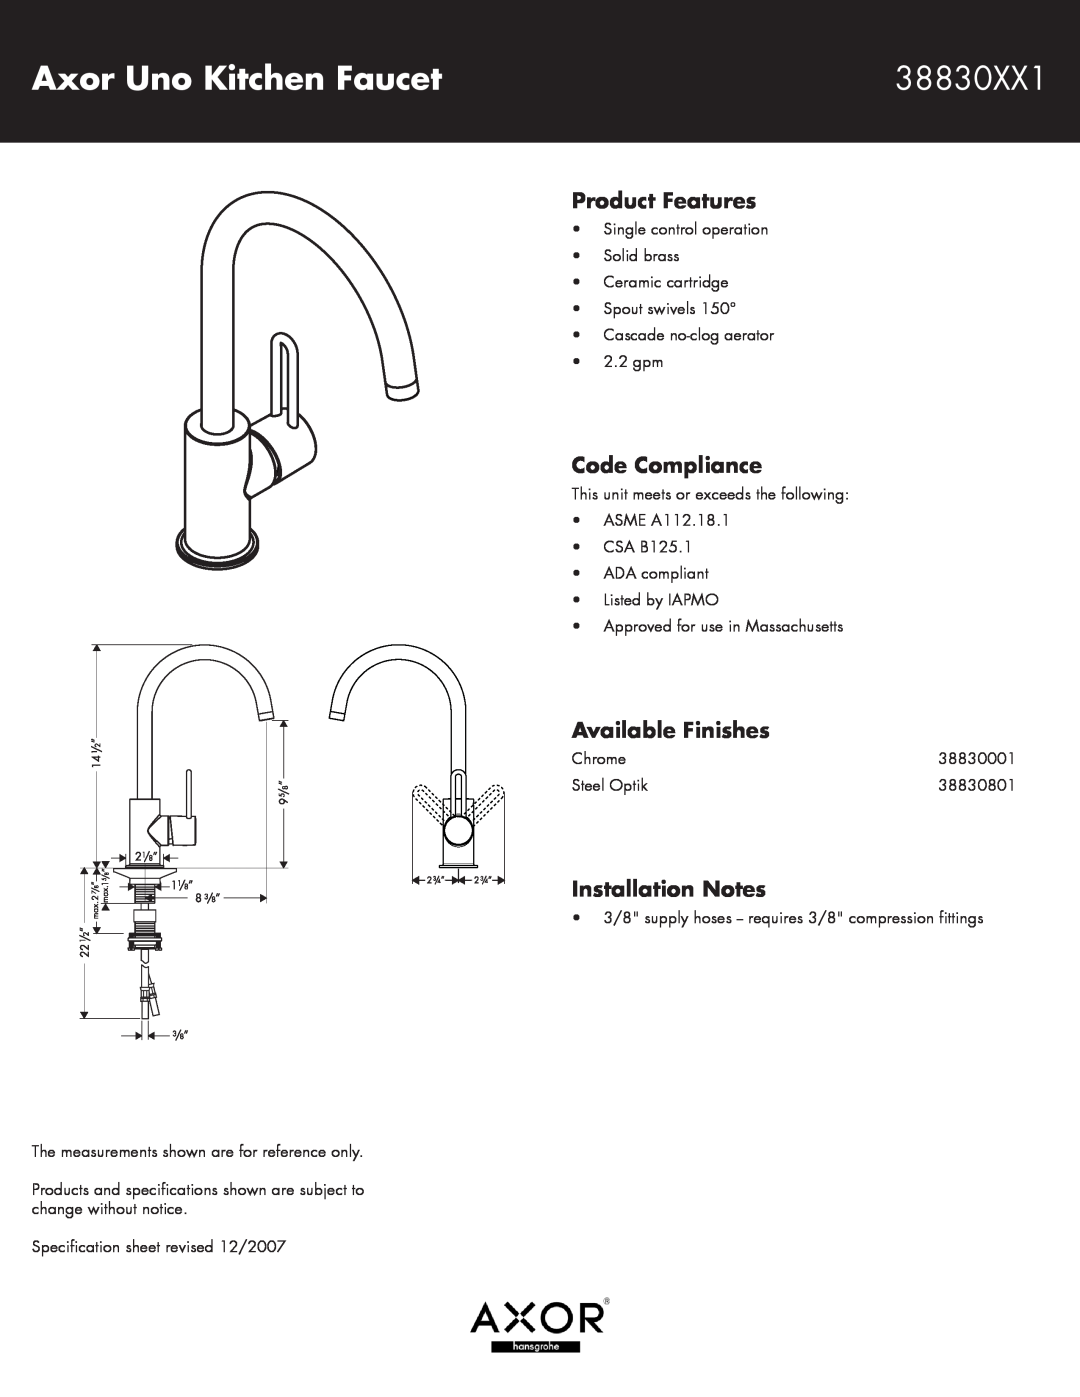 Axor 38830XX1 specifications Axor Uno Kitchen Faucet, Product Features, Code Compliance, Available Finishes 